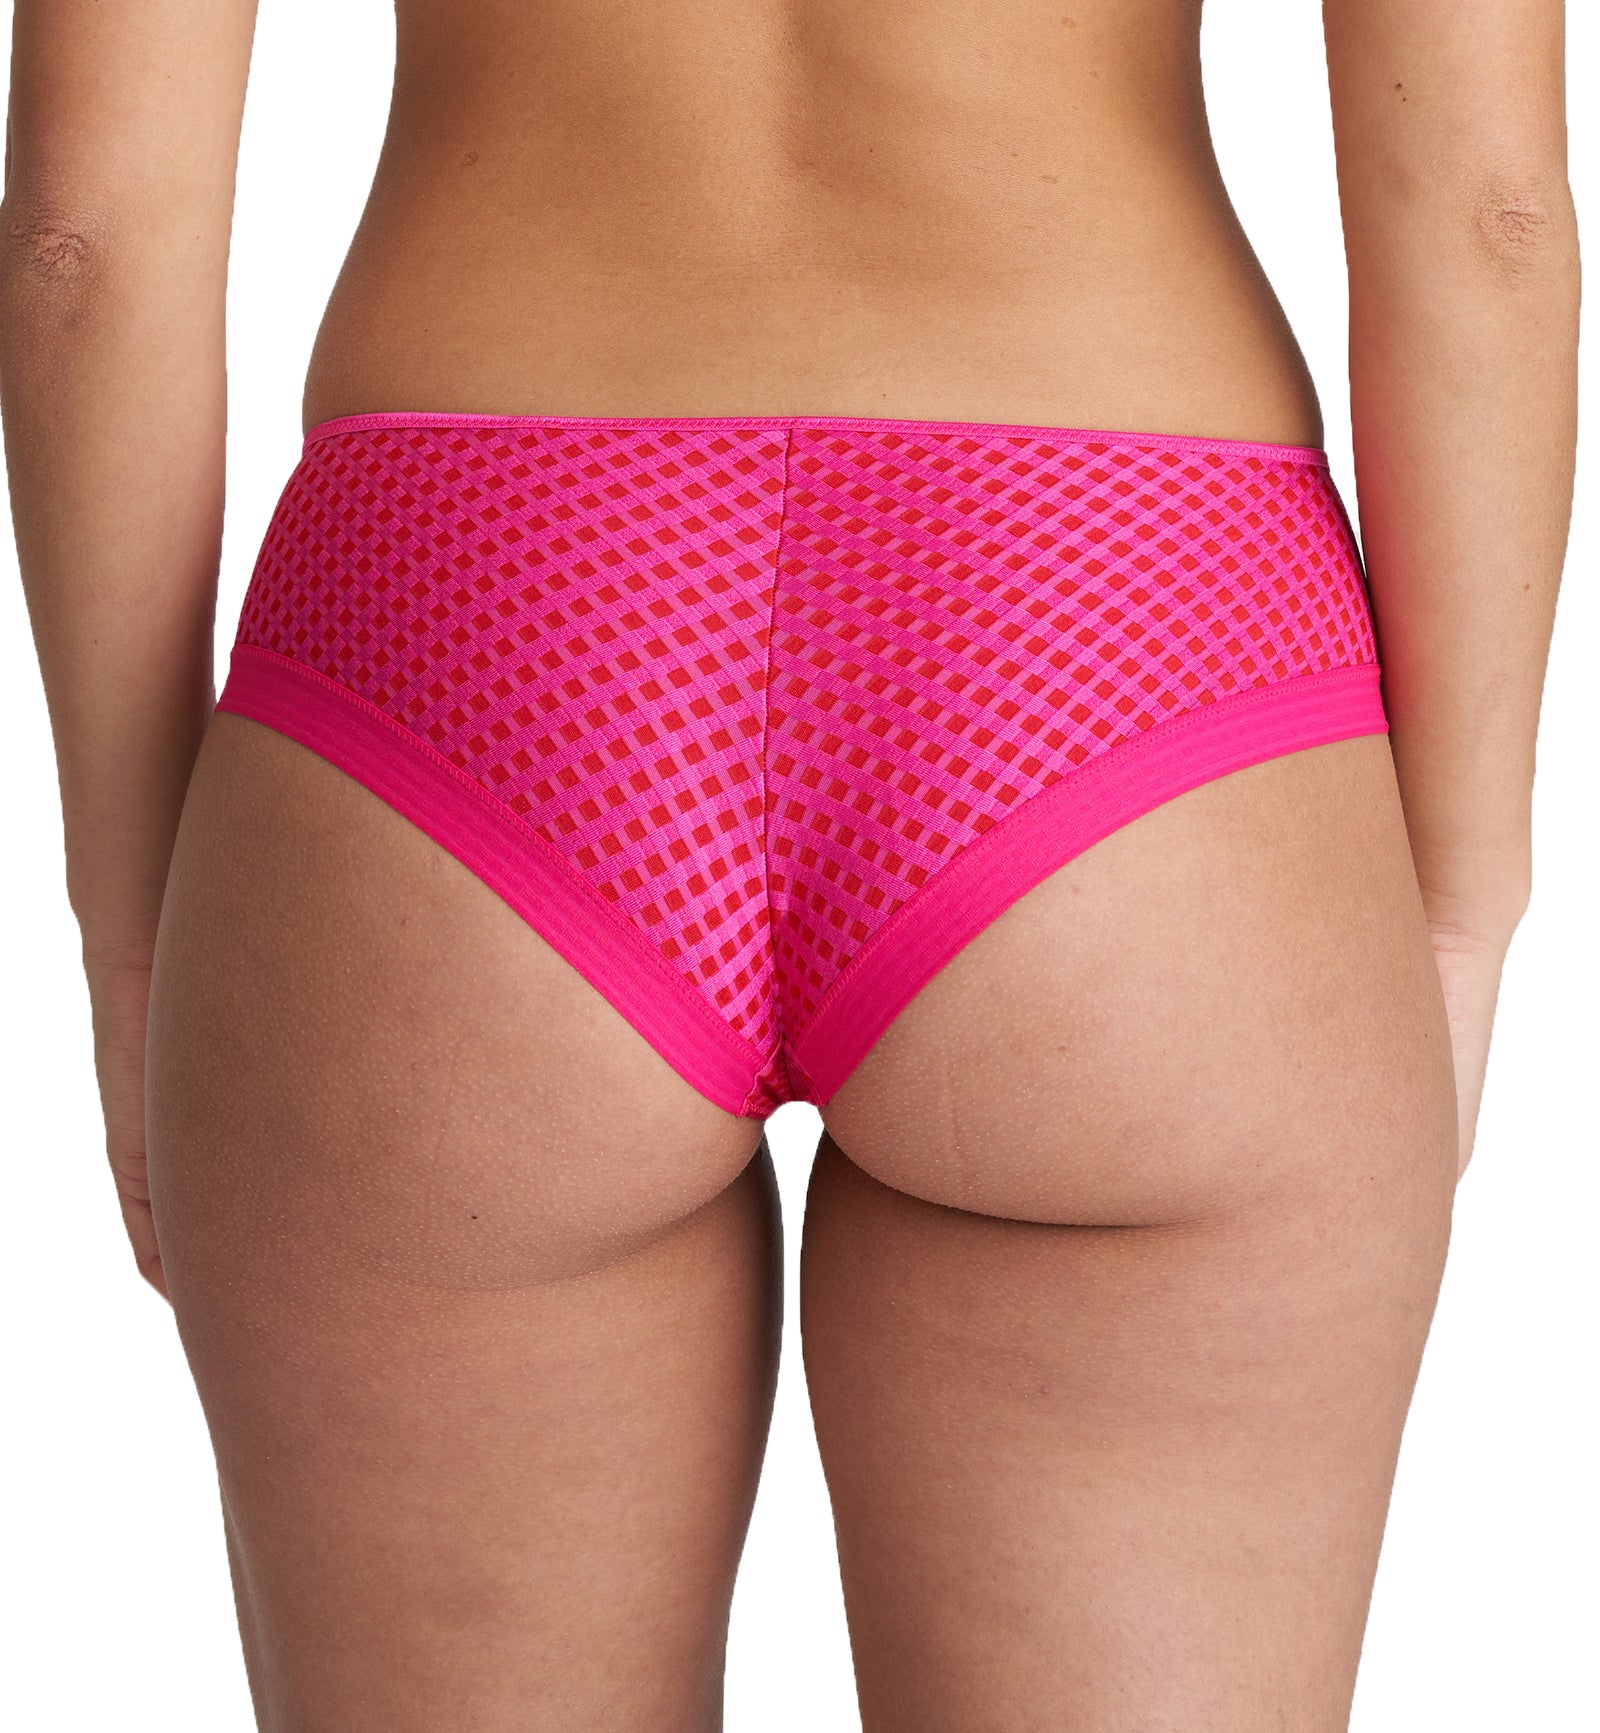 Marie Jo Avero Hotpants Panty (0500415),Small,Electric Pink - Electric Pink,Small